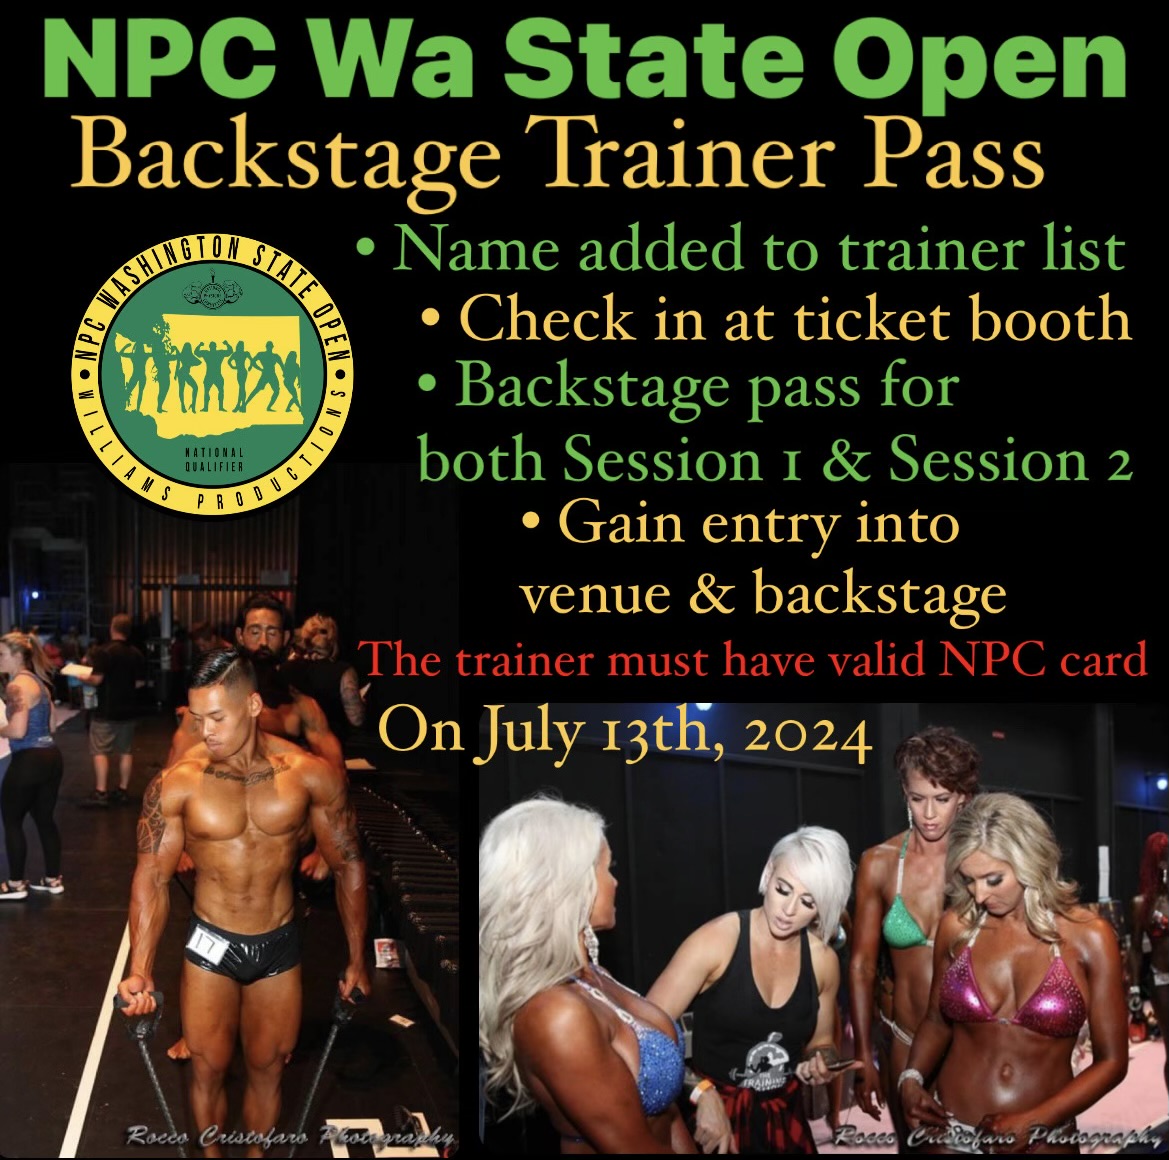 Backstage Trainer Pass